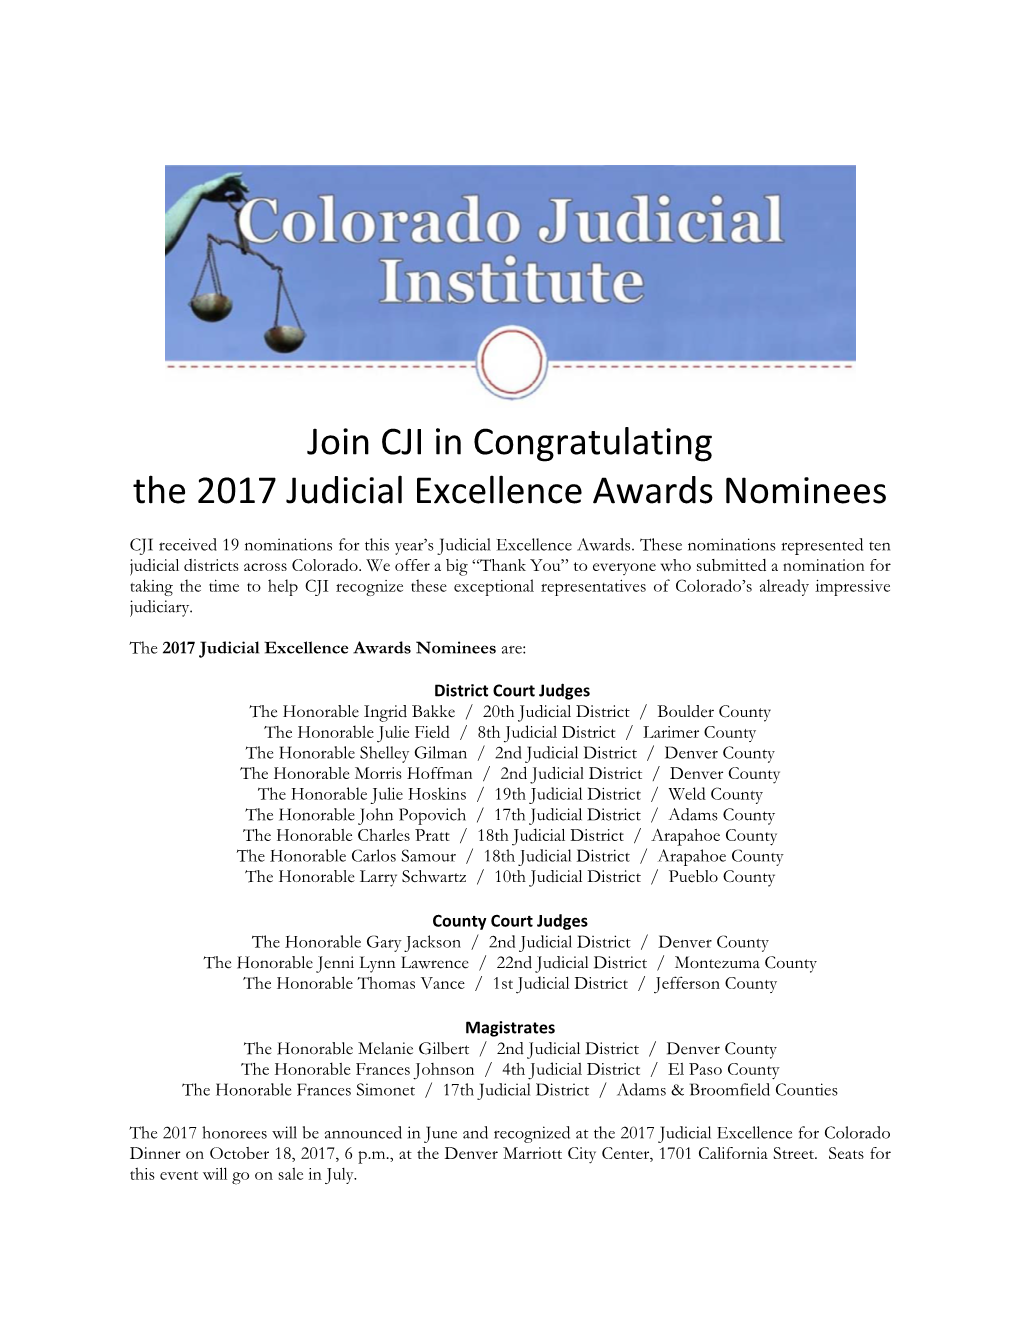 Join CJI in Congratulating the 2017 Judicial Excellence Awards Nominees